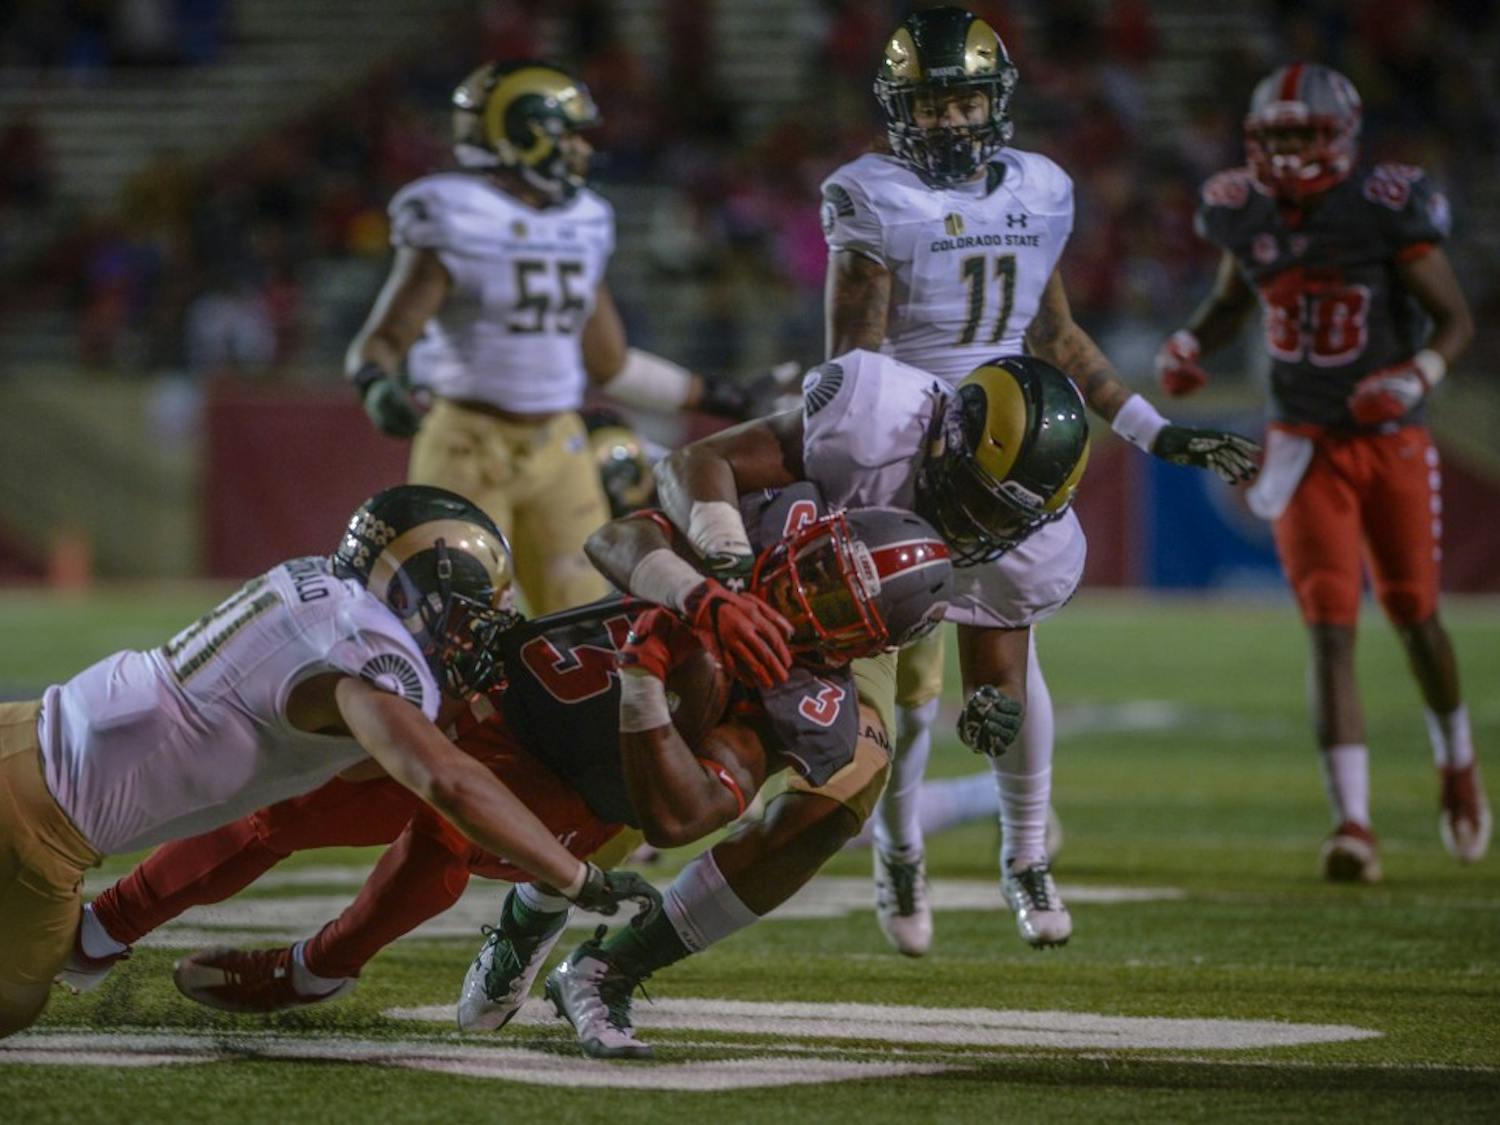 Richard McQuarleyholds&nbsp; onto the ball while being sacked by Max McDonald, left, and Arjay Jean during the televised game against Colorado State University at Dreamstyle Stadium, October 20, 2017. The Lobos were defeated 27-24 in the Friday night Mountain West match-up.